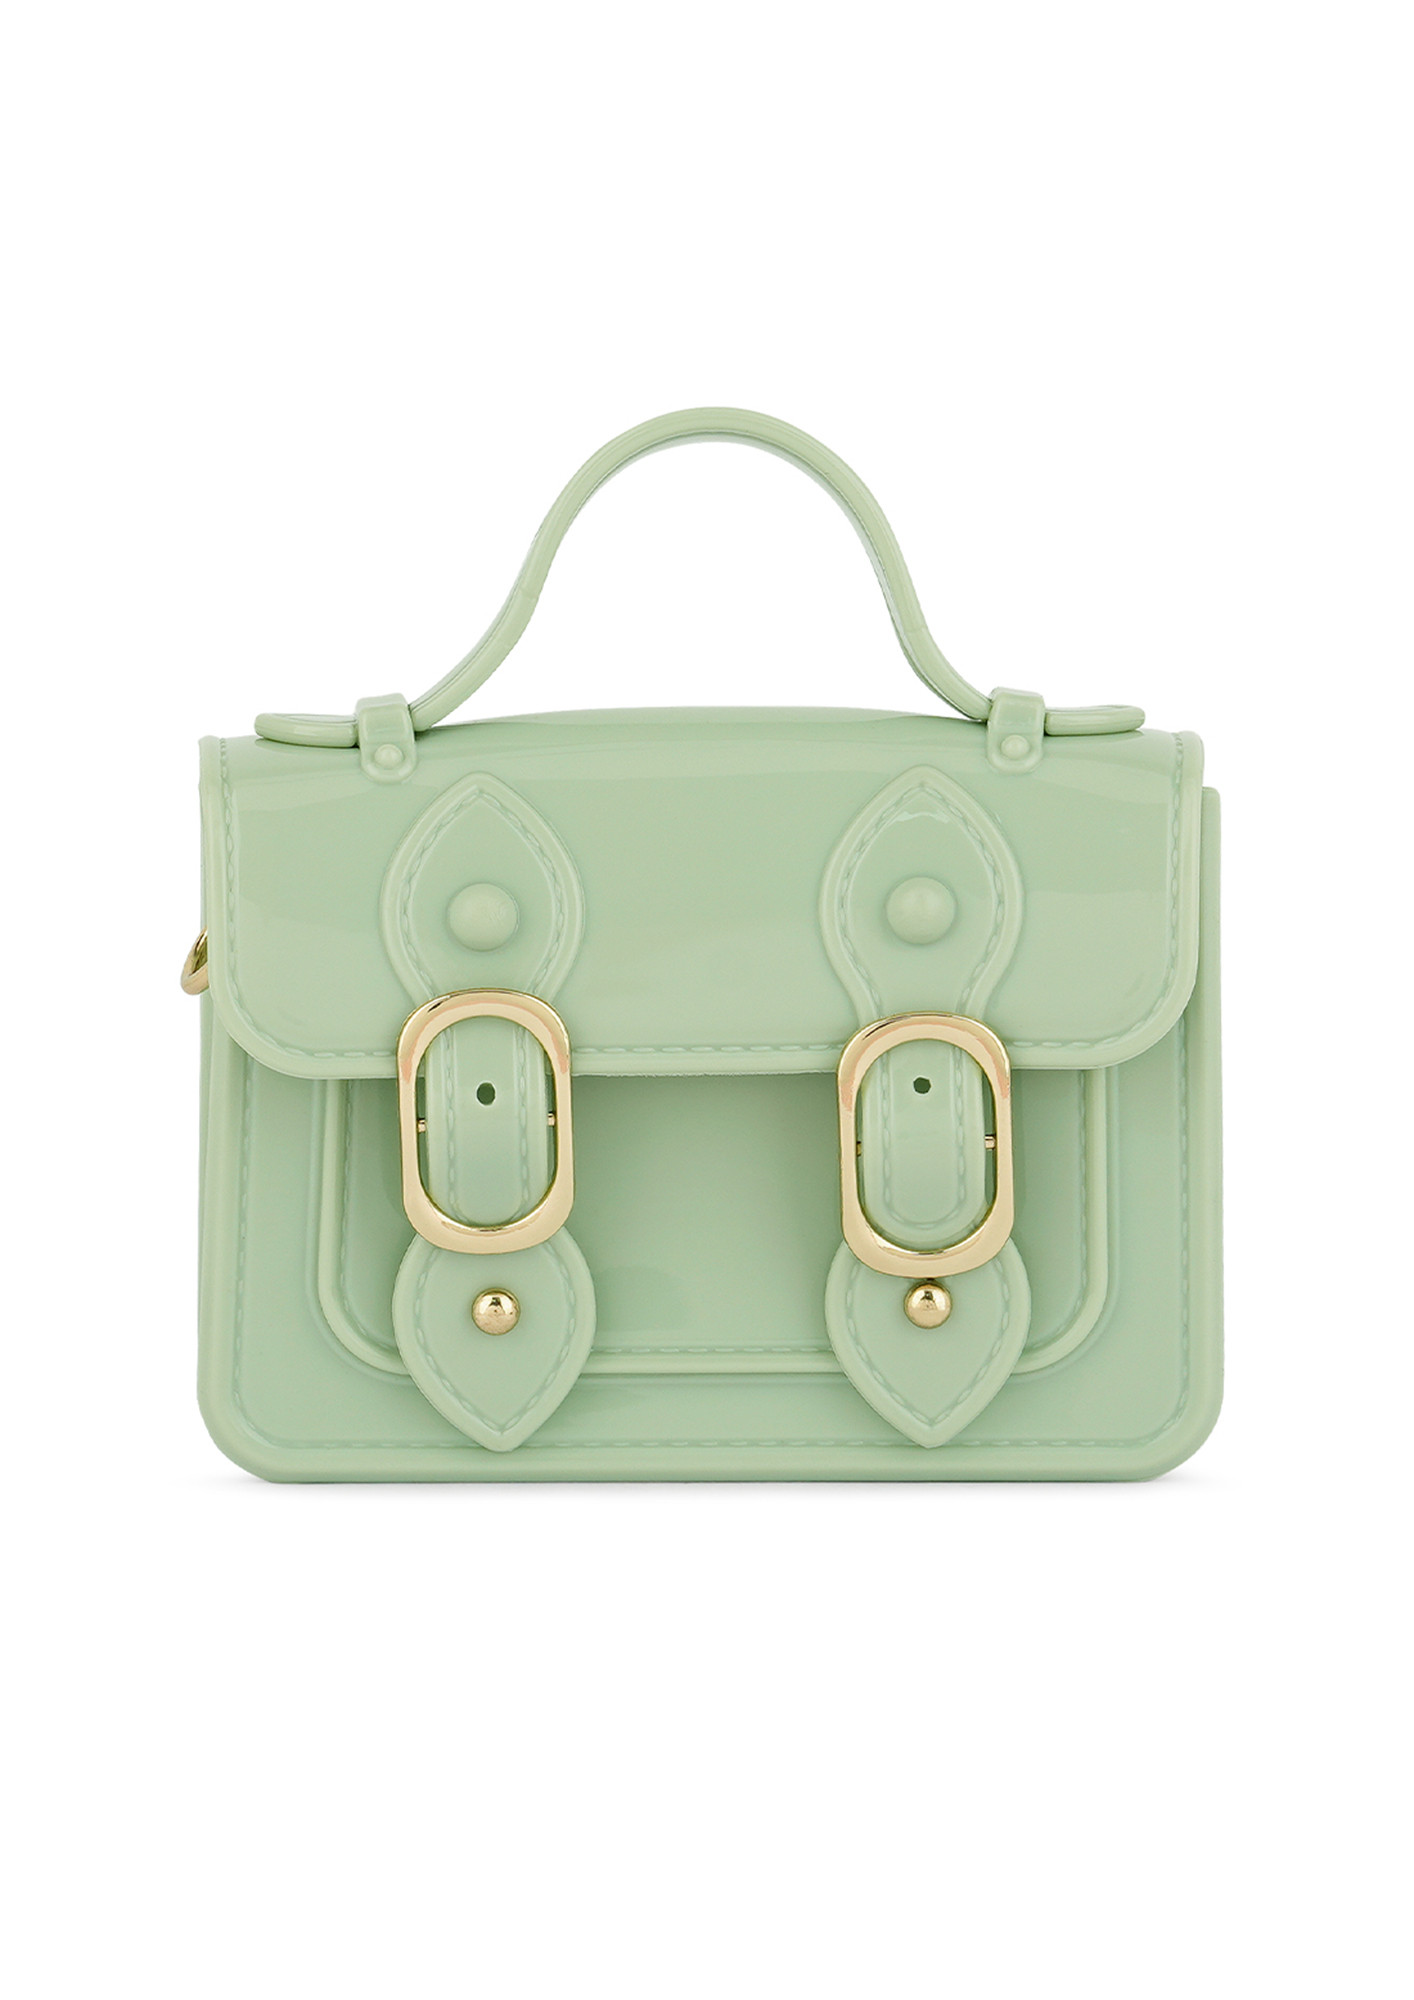 Jelly Saddle Sling Bag in Mint